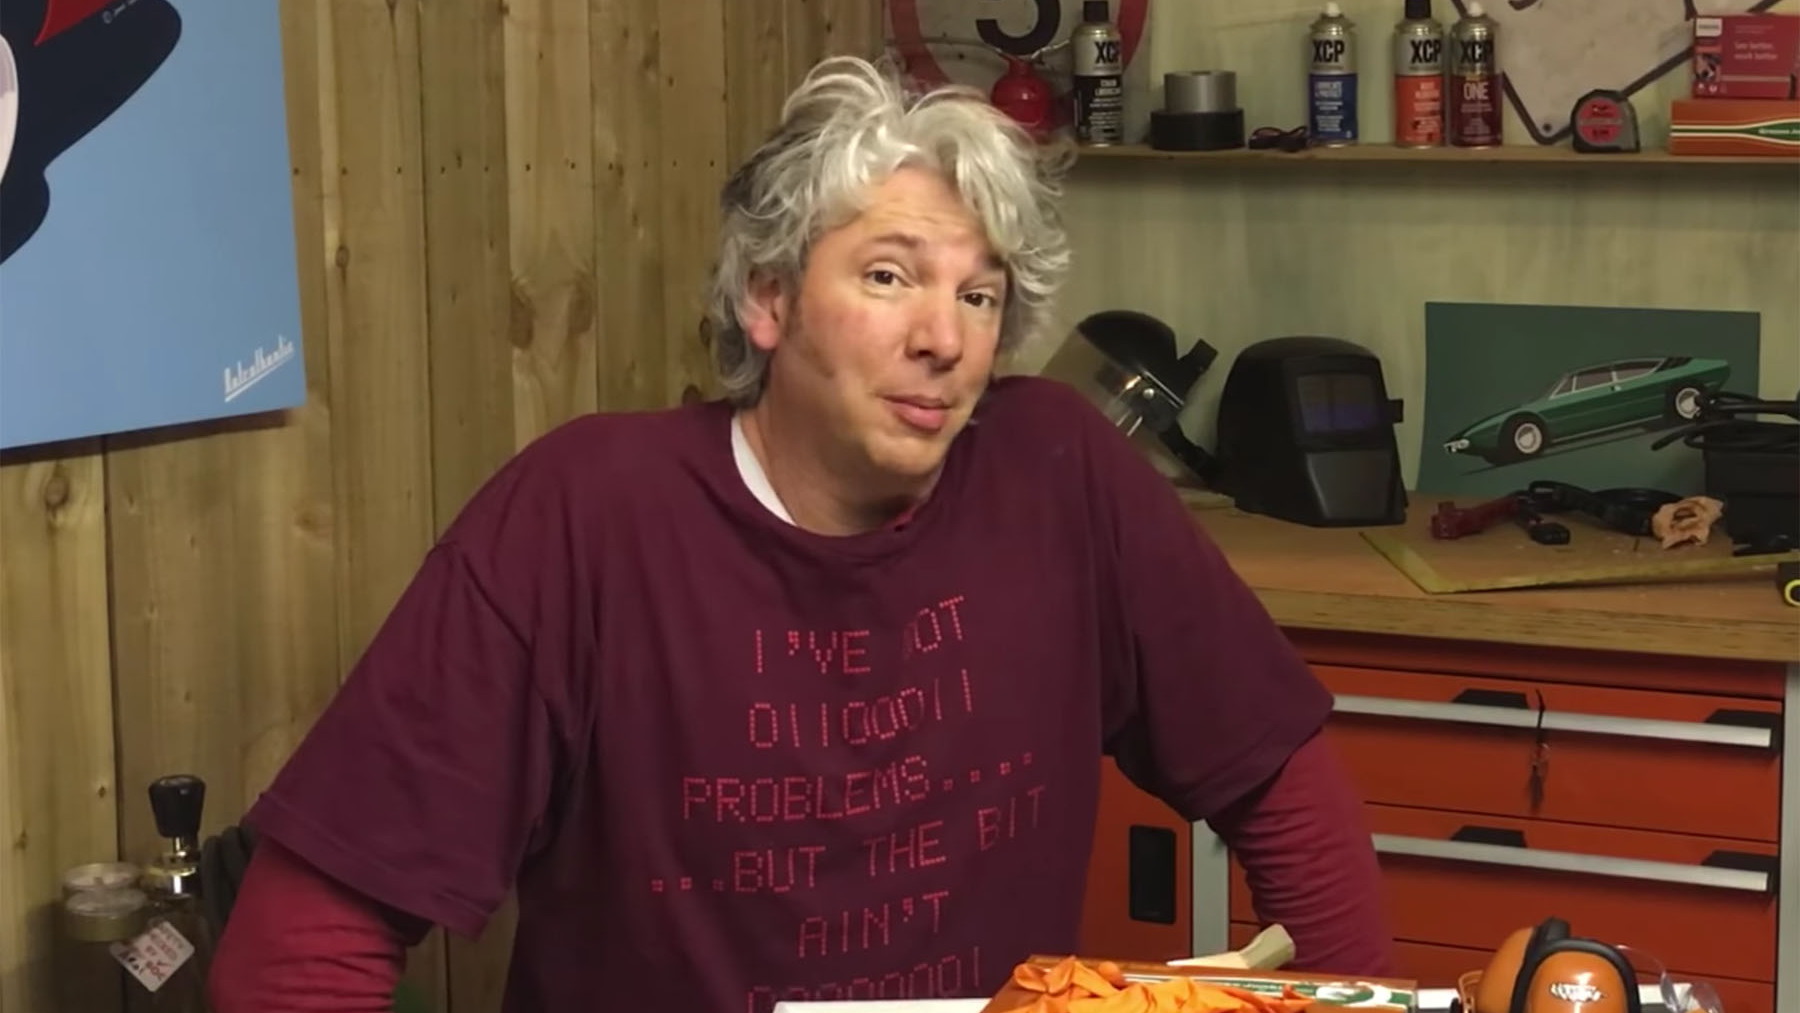 Edd China announcing he will leave TV's "Wheeler Dealers"